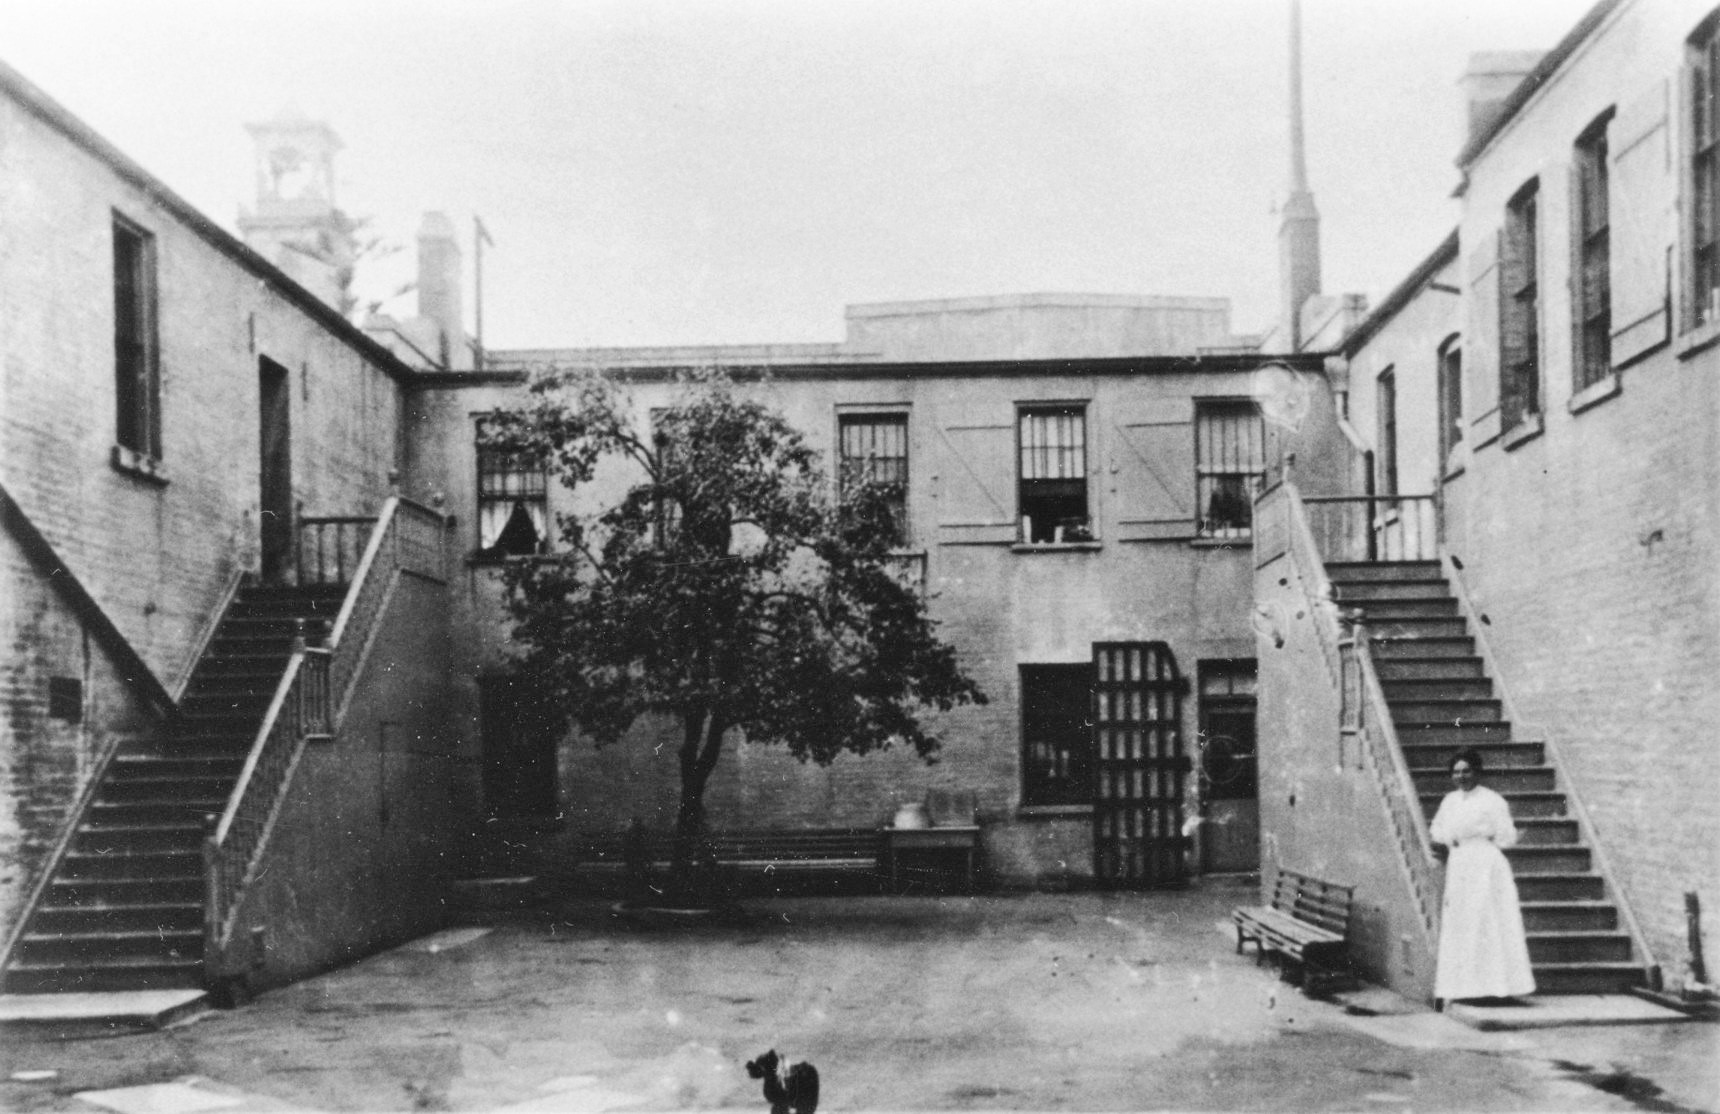 Early female prison staff supervised women at San Quentin, like in this early courtyard image.